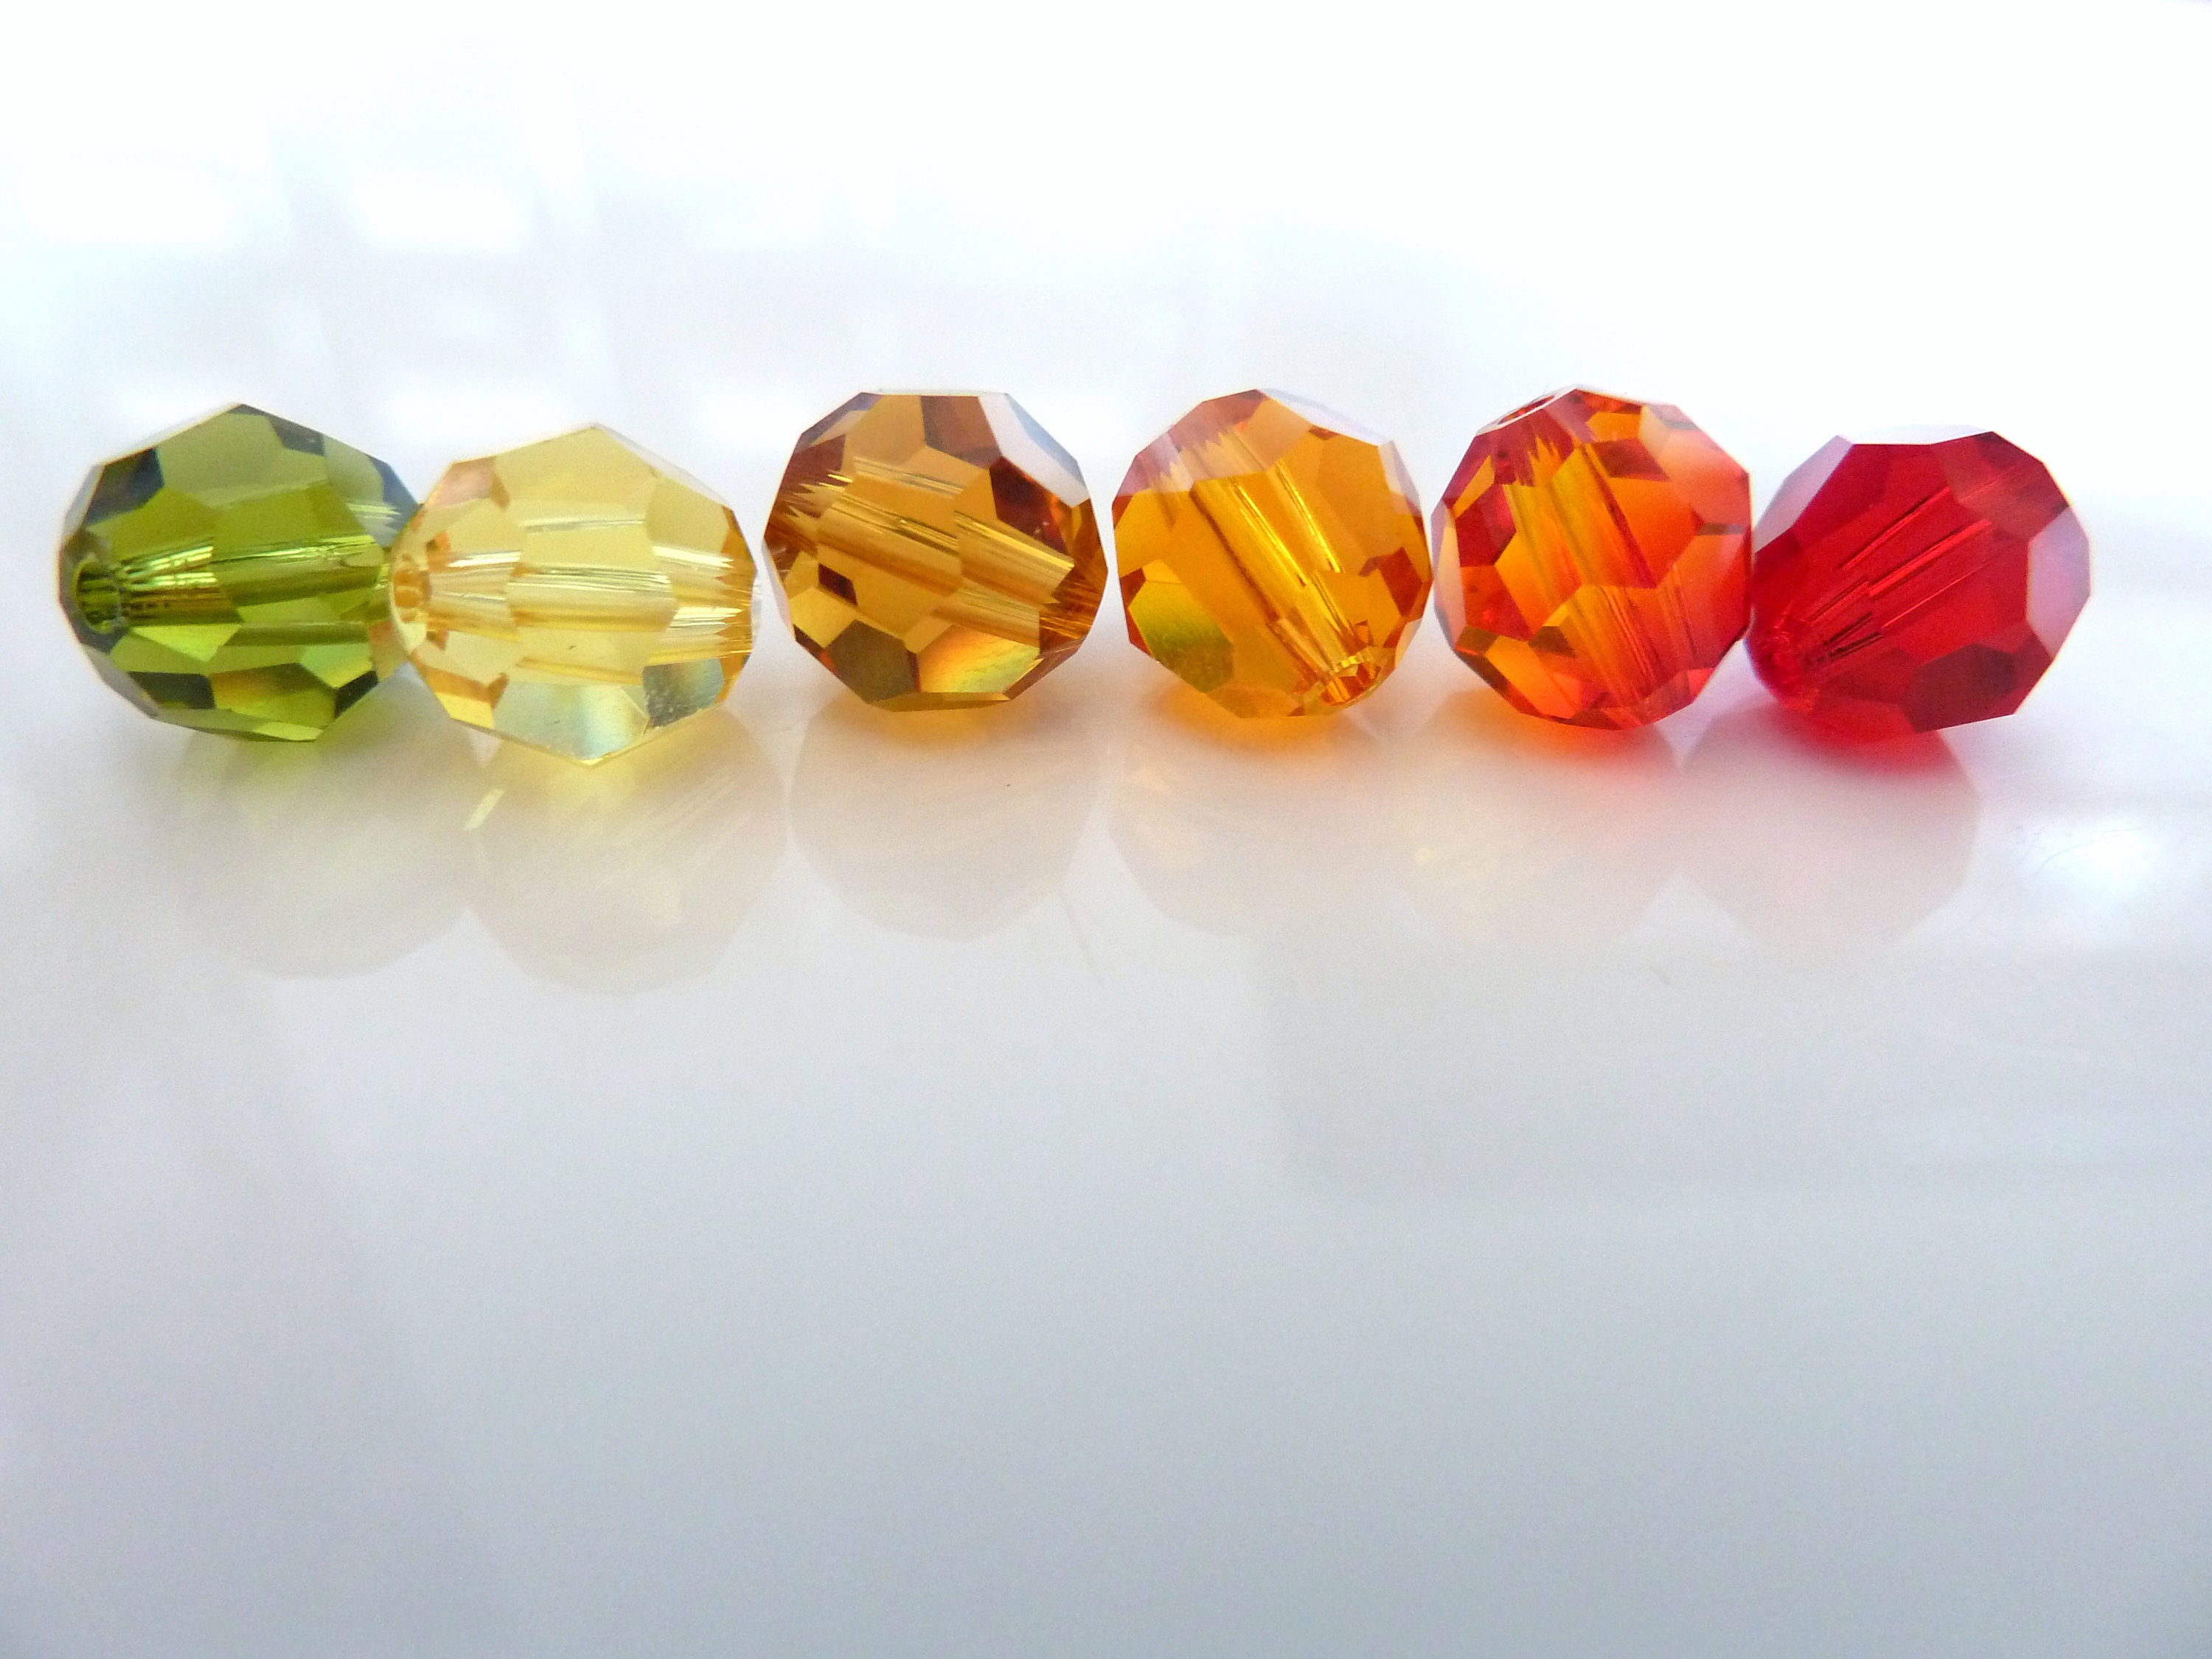 6 Pcs. Swarovski 8mm Autumn Blend Round Crystal Beads 5000 - 1 Of Each Color - Fall Mixed Lot - Loose Crystals Bead Mix - Jewelry Making - Ab8R